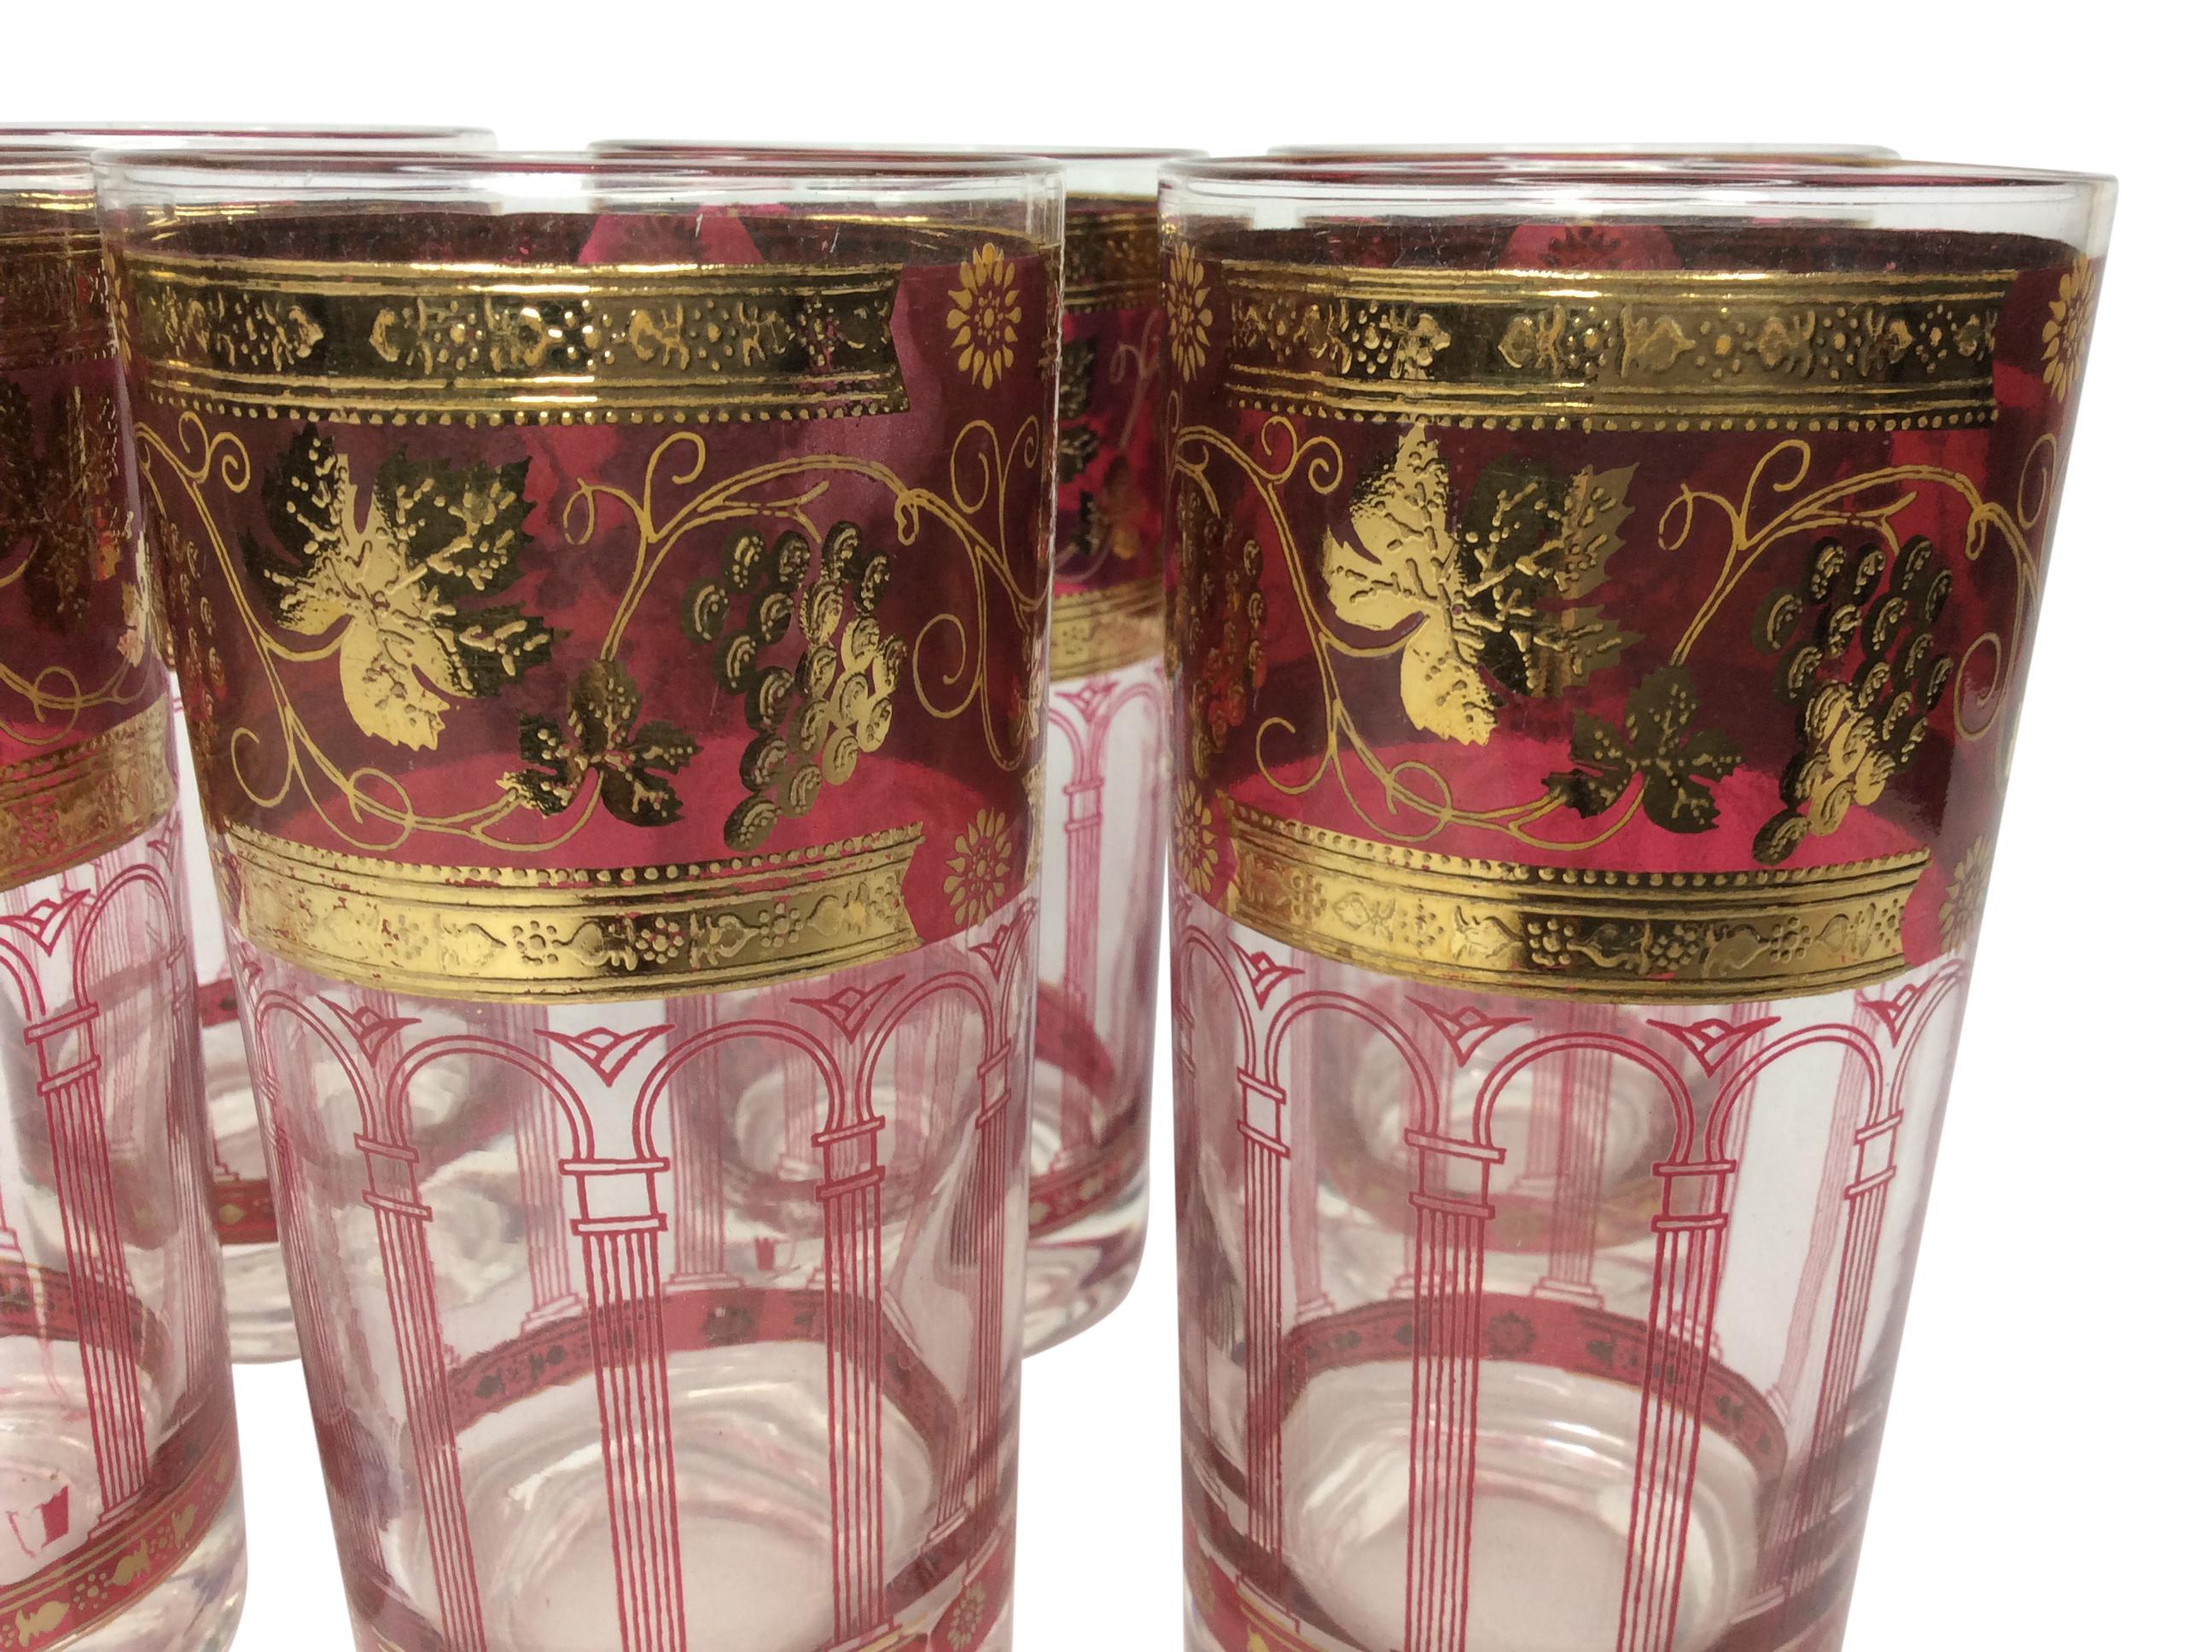 Set of 6 Vintage Cera Highball Glasses with a Wide Gilt and Cranberry Band with Gilt grapes leaves. Below the band is a series of cranberry colored arches and columns.
